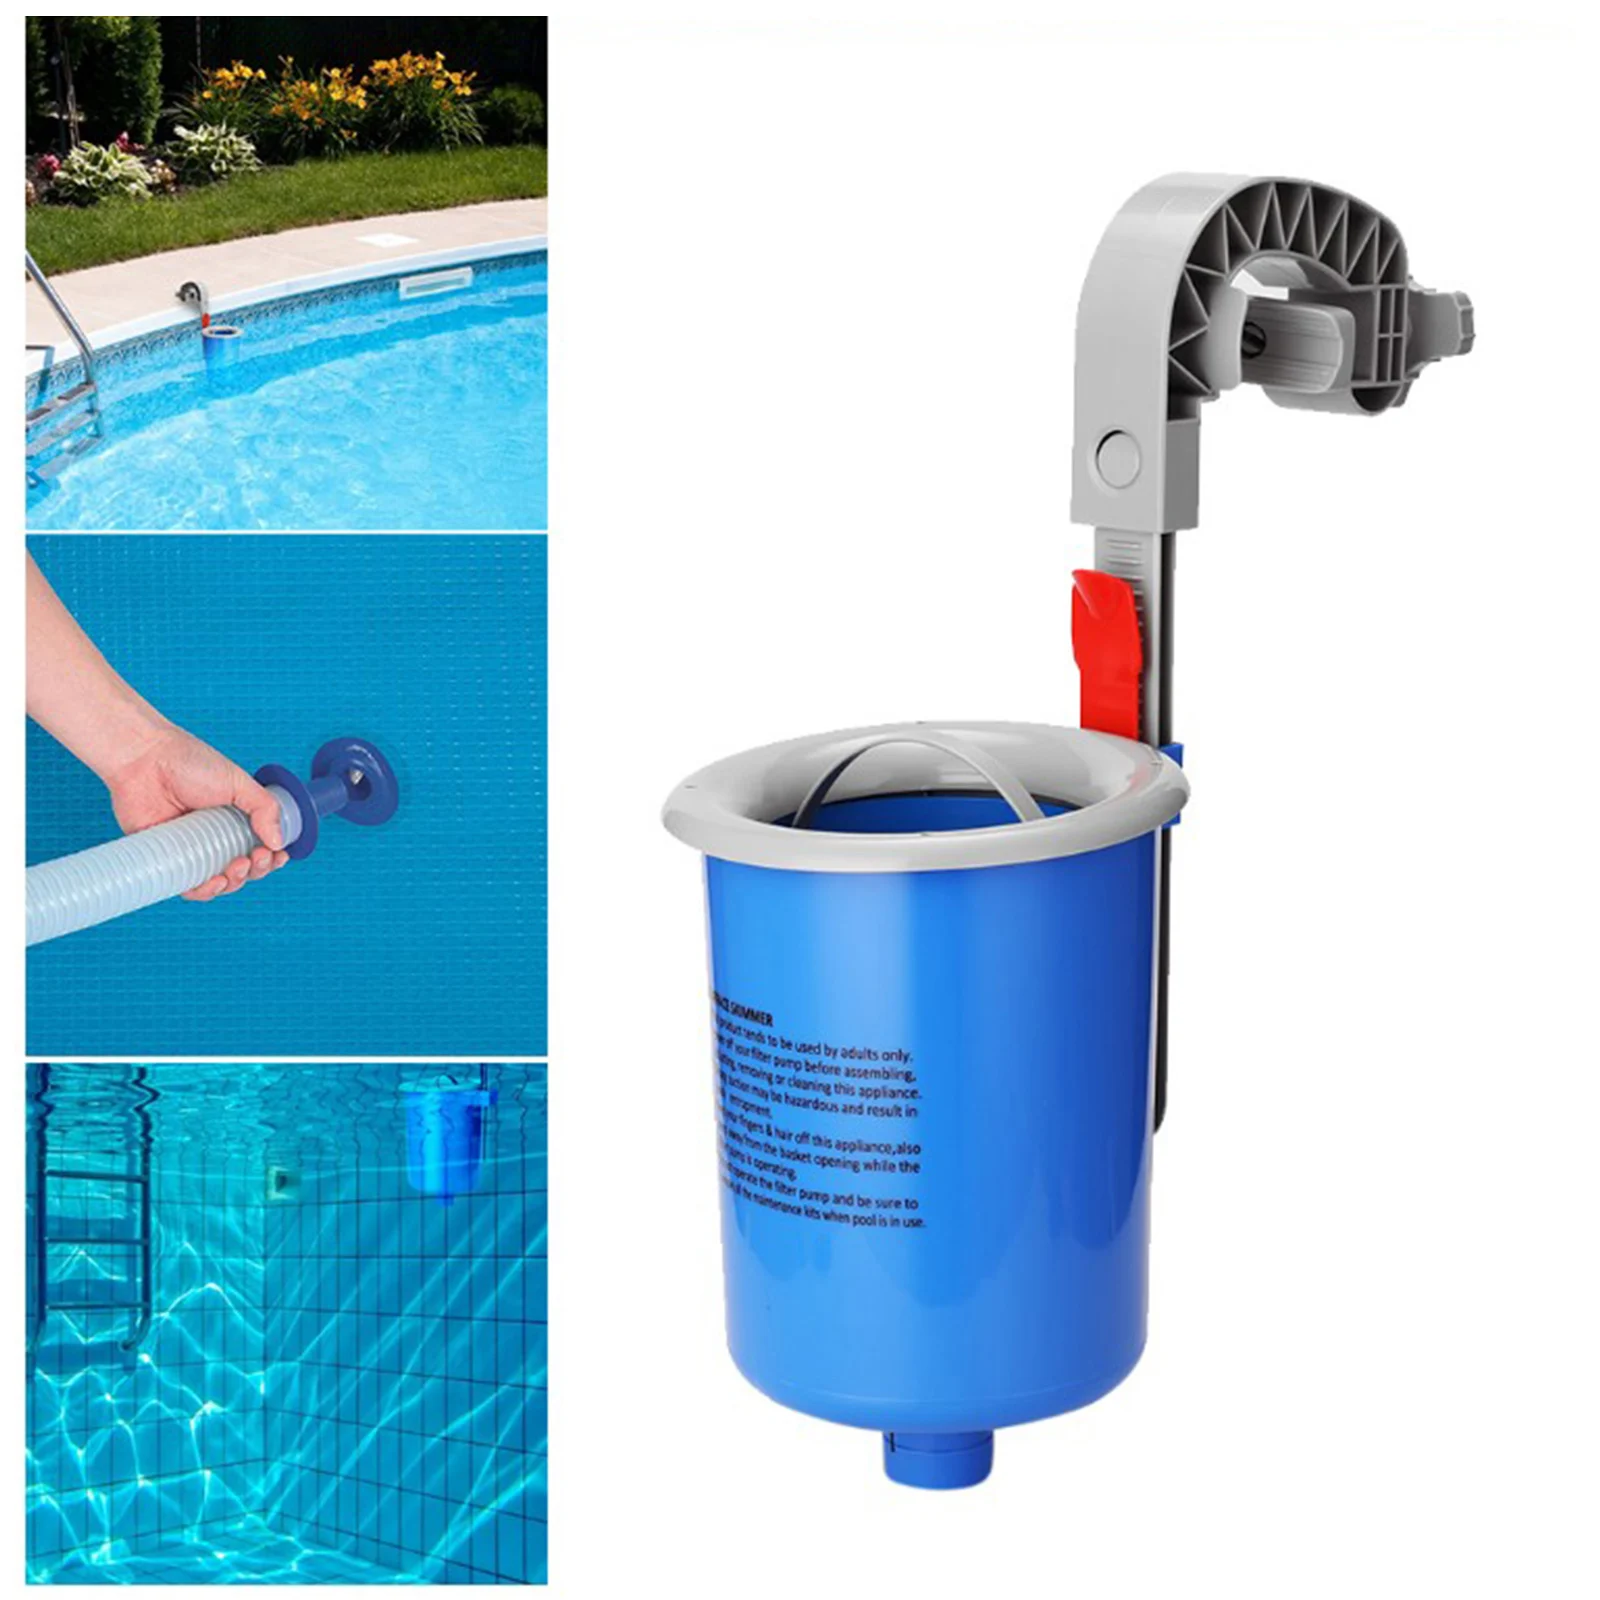 Swimming Pool Automatic Skimmer Easy Installed for Cleaning Pools Fountains